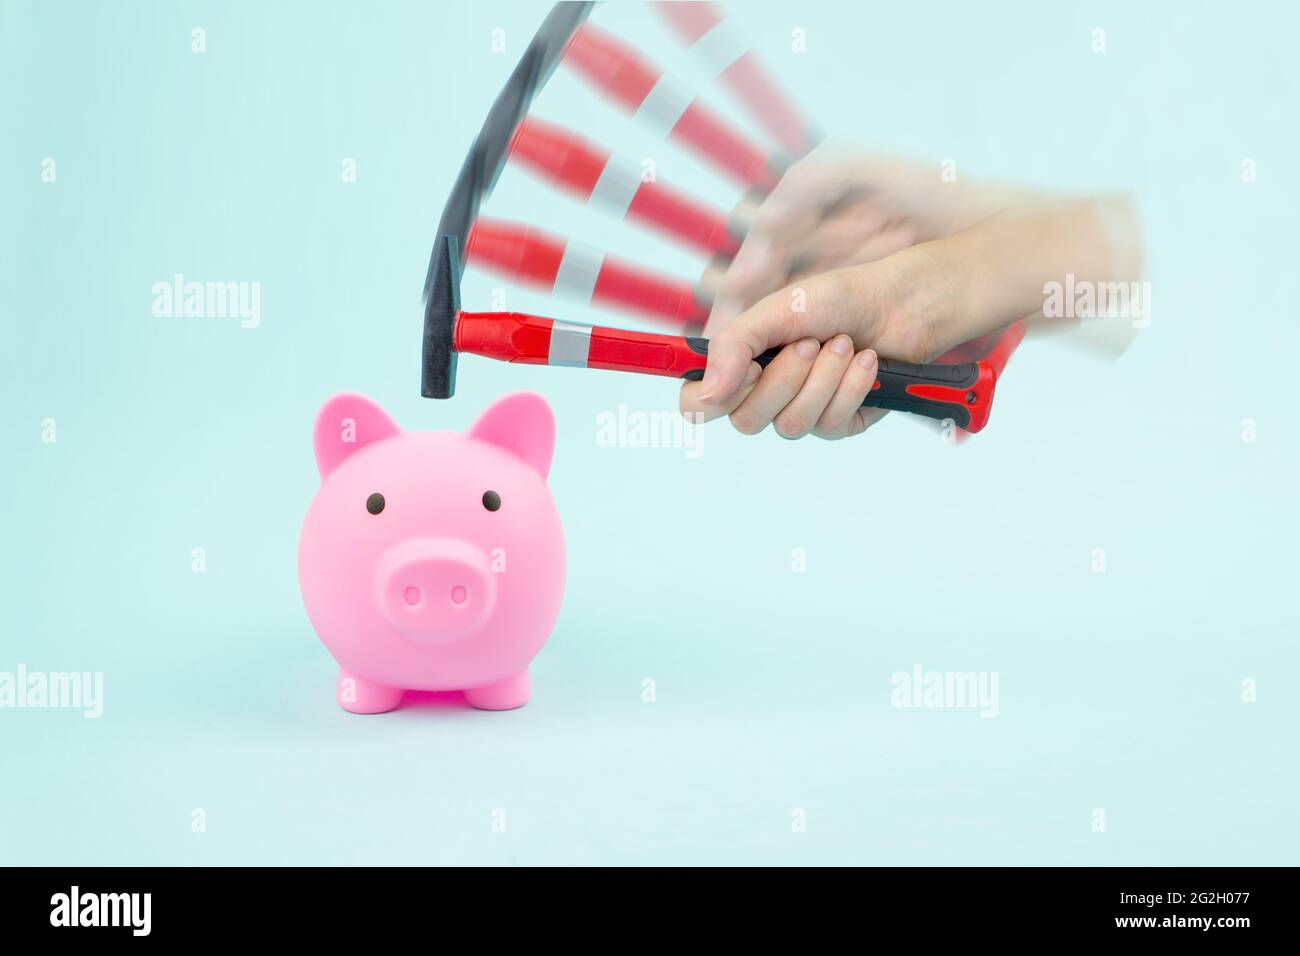 Hand hammer smashes piggy bank with savings. Concept of financial crisis Stock Photo